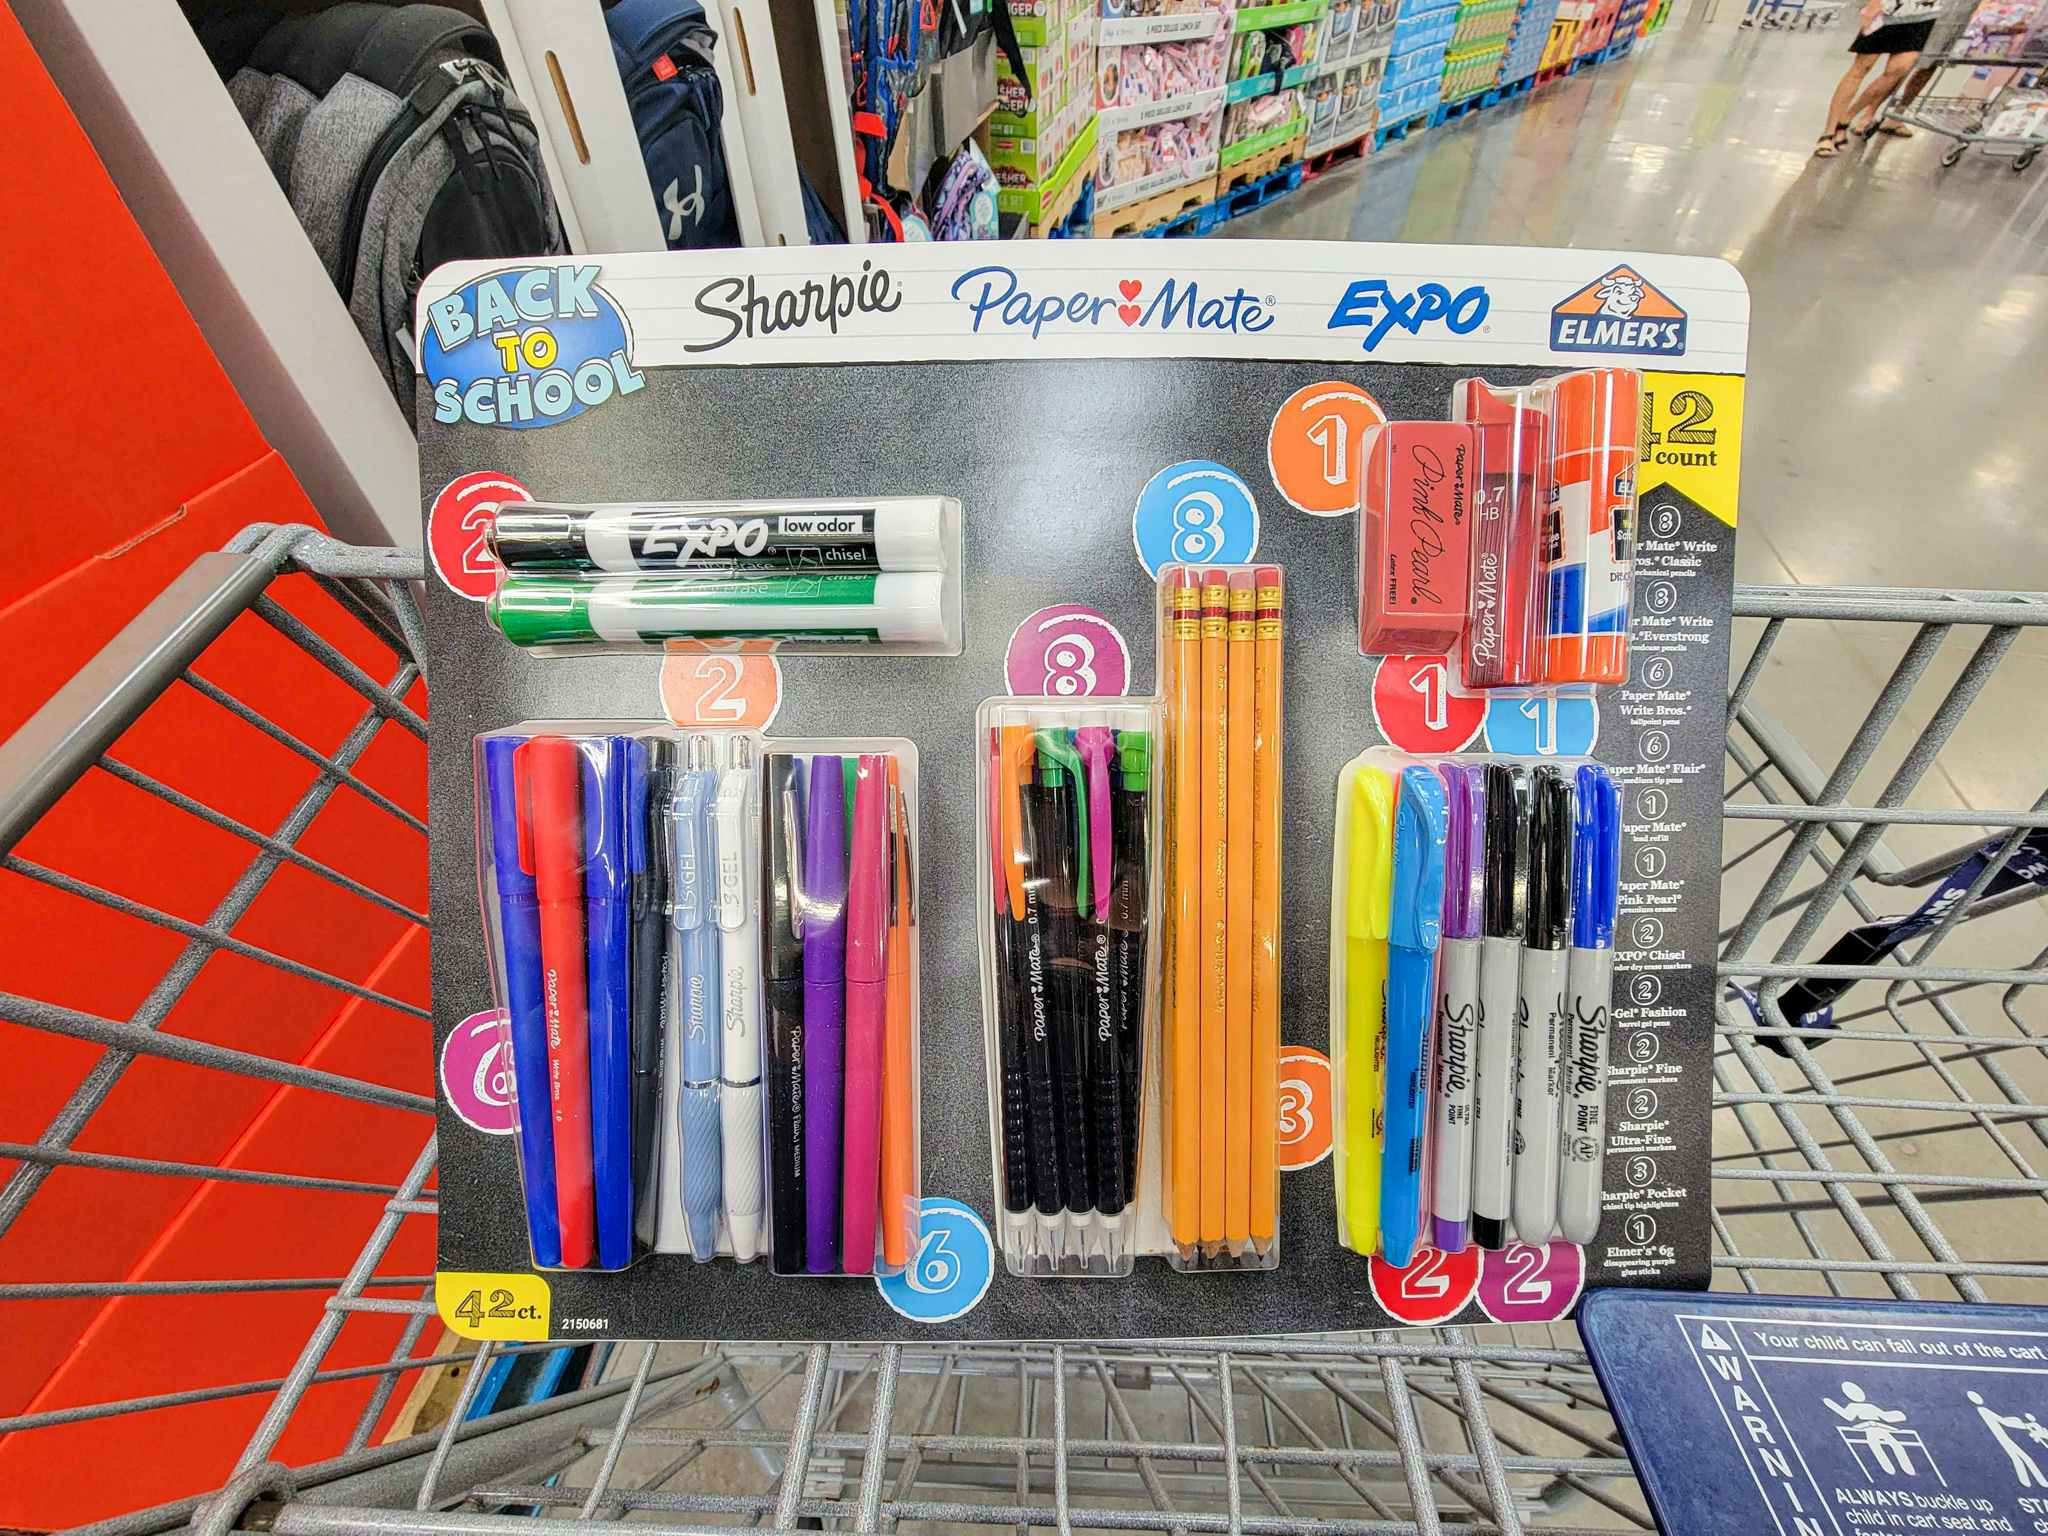 a back to school kit in a cart, containing pencils, pens, sharpies, dry erase markers, etc